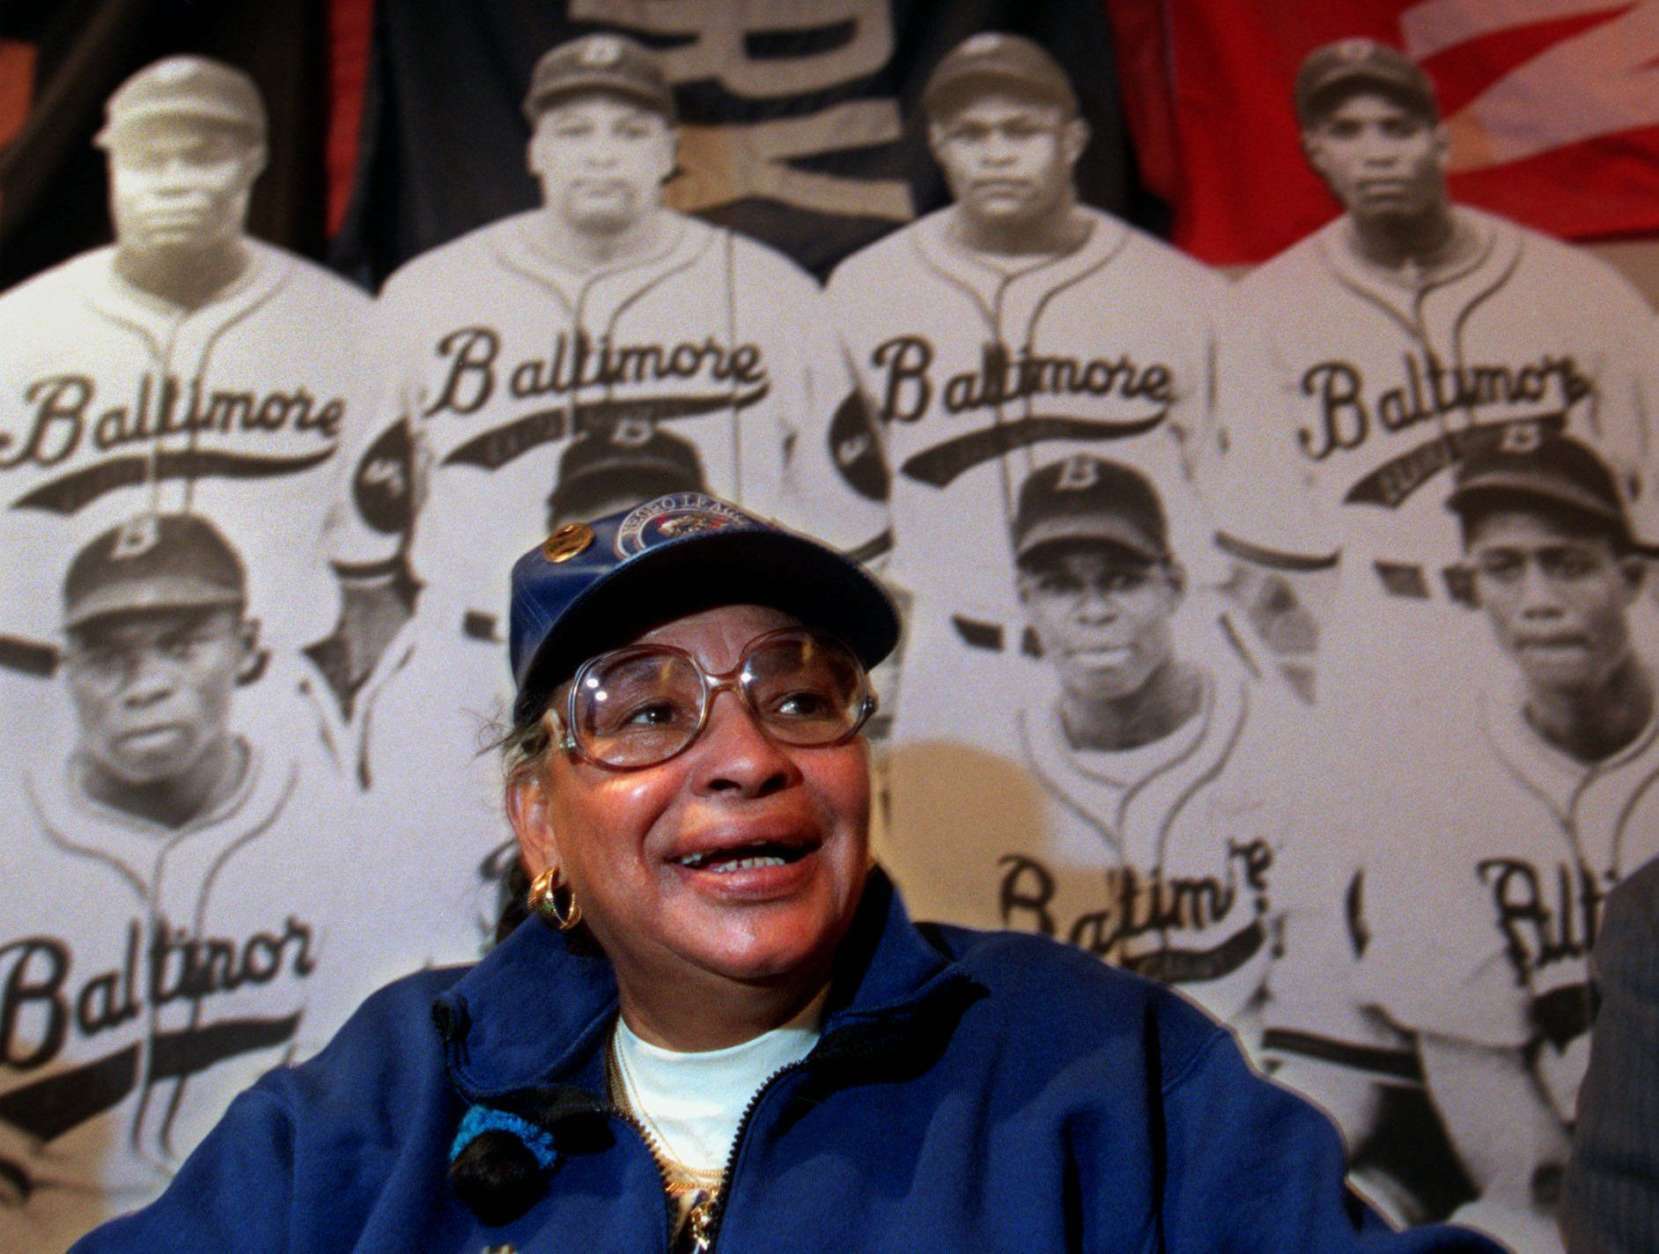 Mamie "Peanuts" Johnson, seen February 14, 1998, at the Babe Ruth Museum in Balitmore, spent hot, dusty summer days playing pickup baseball as a child in the 1940s and dreamed of making the big leagues. Johnson overcame rejection by the all-white women's league that began playing during World War II and became one of only three women to play in the Negro leagues. (AP Photo/Khue Bui)